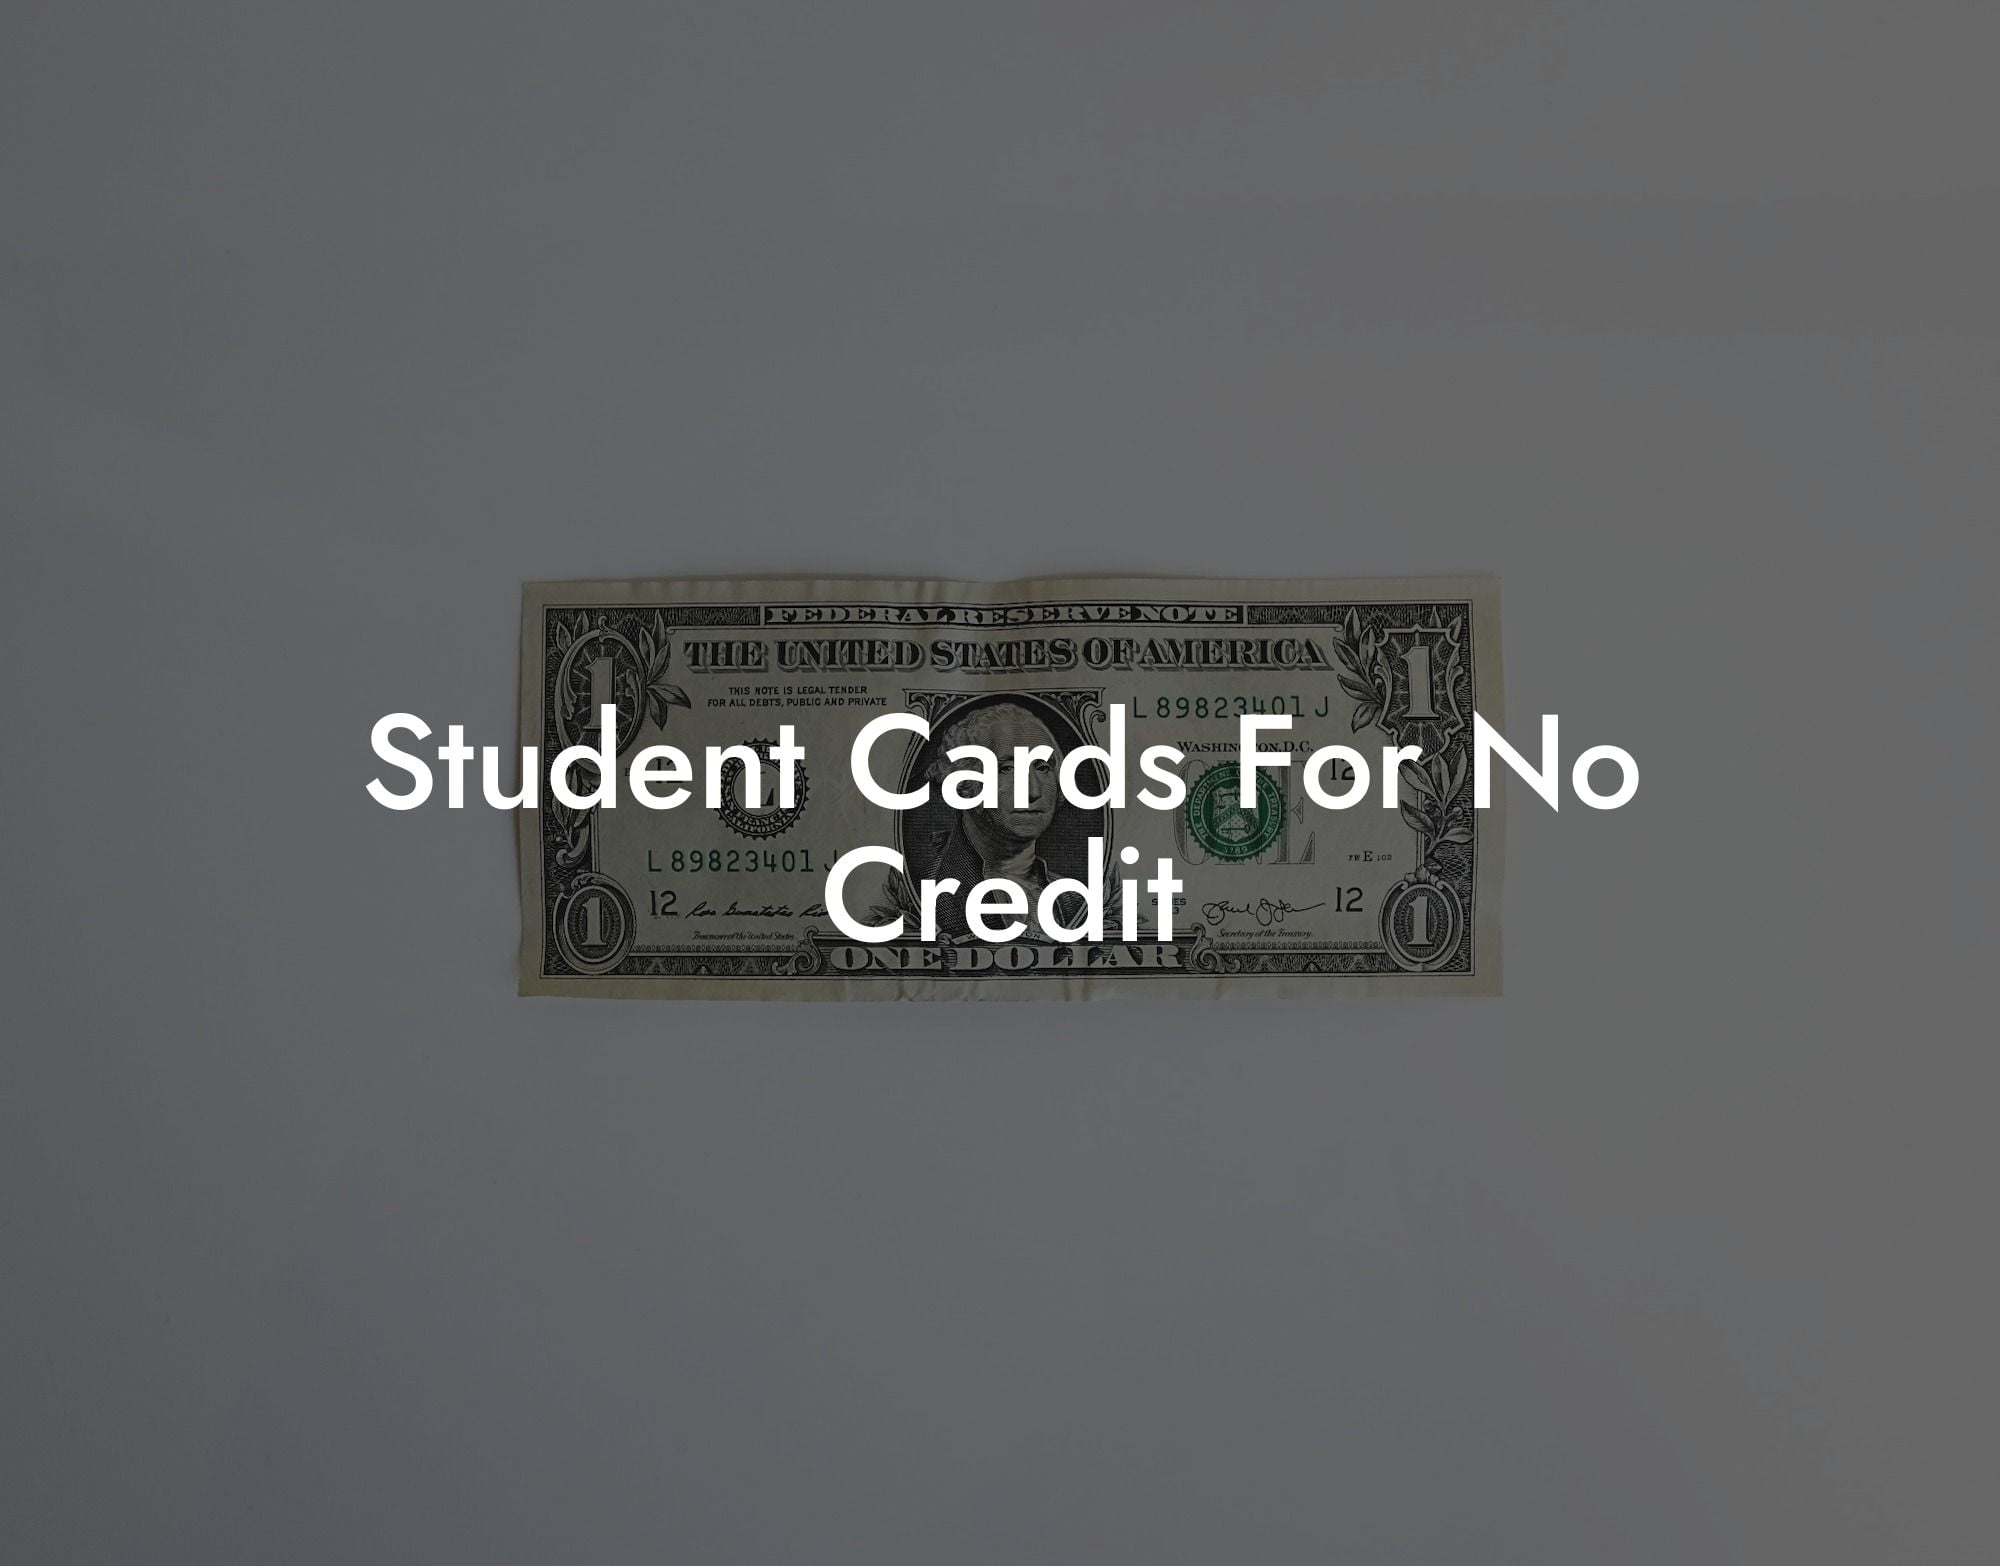 Student Cards For No Credit